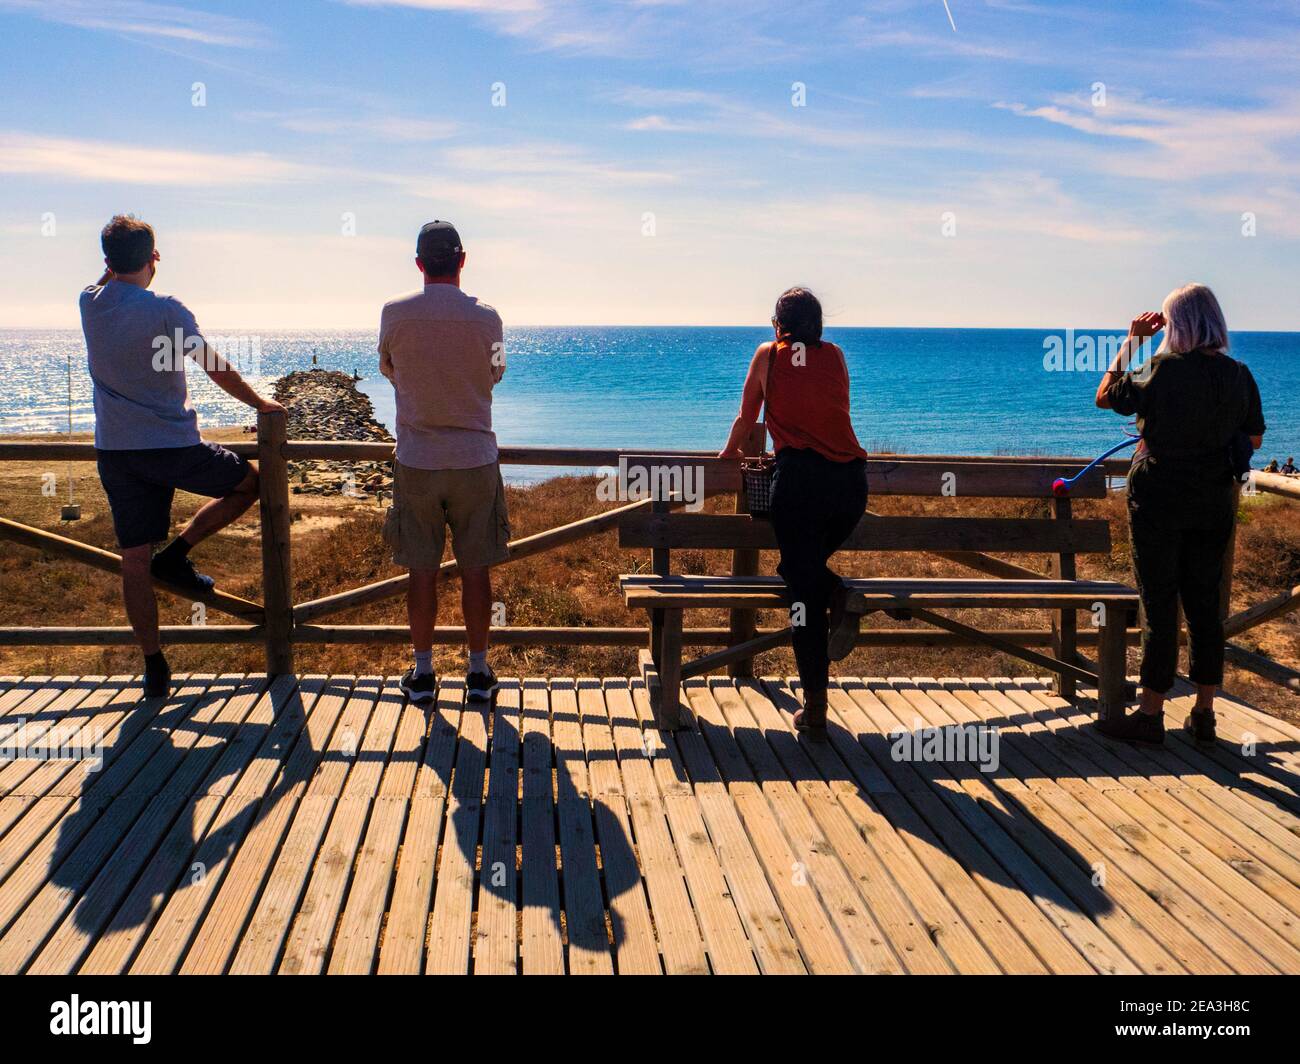 Marbella, Malaga, Spain.  October 2020.   Four tourists with their backs turned looking at the sea on a wooden viewing platform on the Marbella coastl Stock Photo